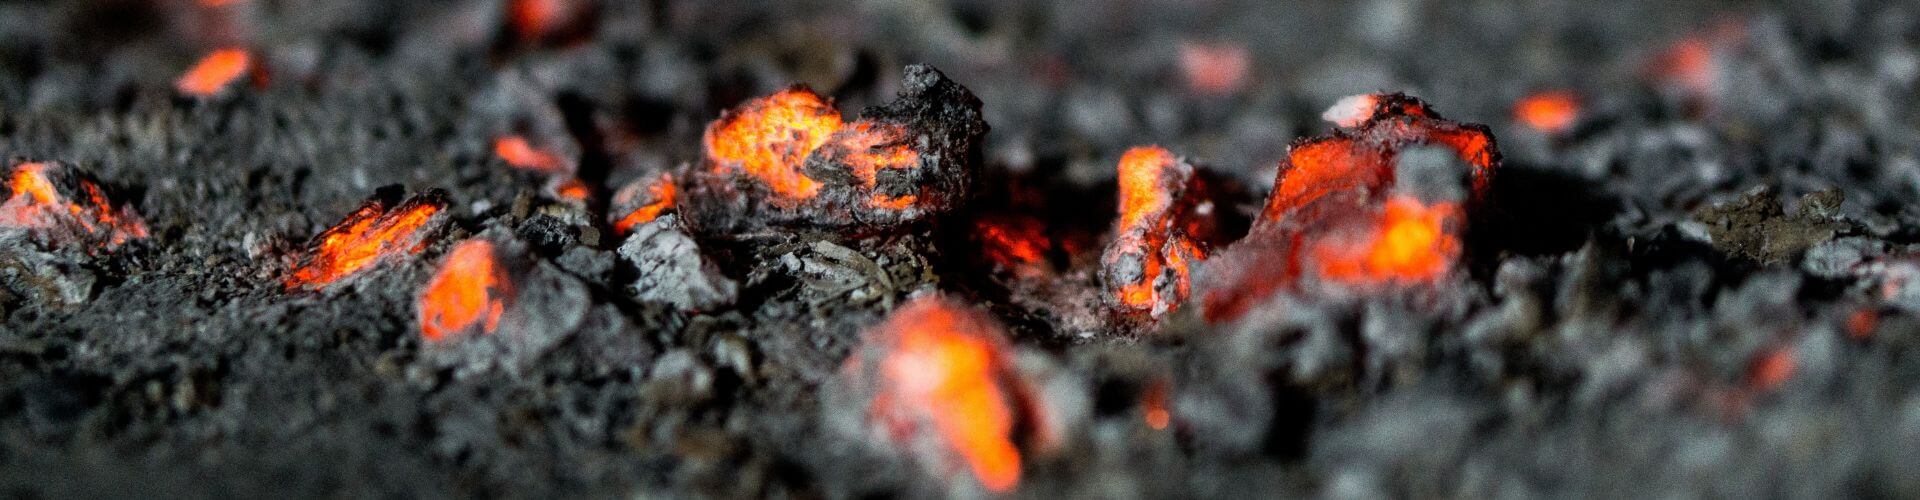 A close-up image of burning embers and ash on the ground. 